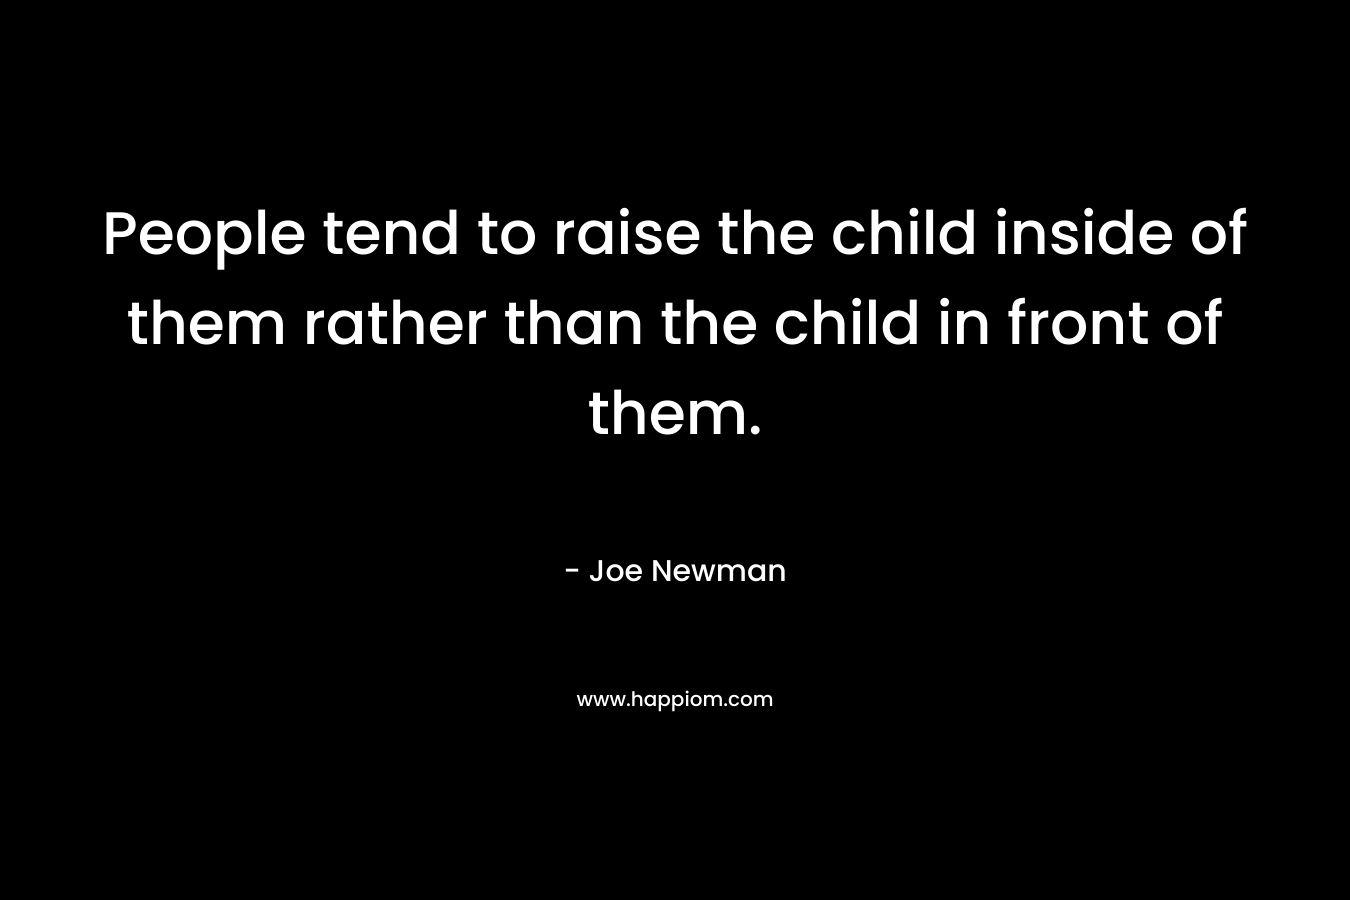 People tend to raise the child inside of them rather than the child in front of them. – Joe Newman